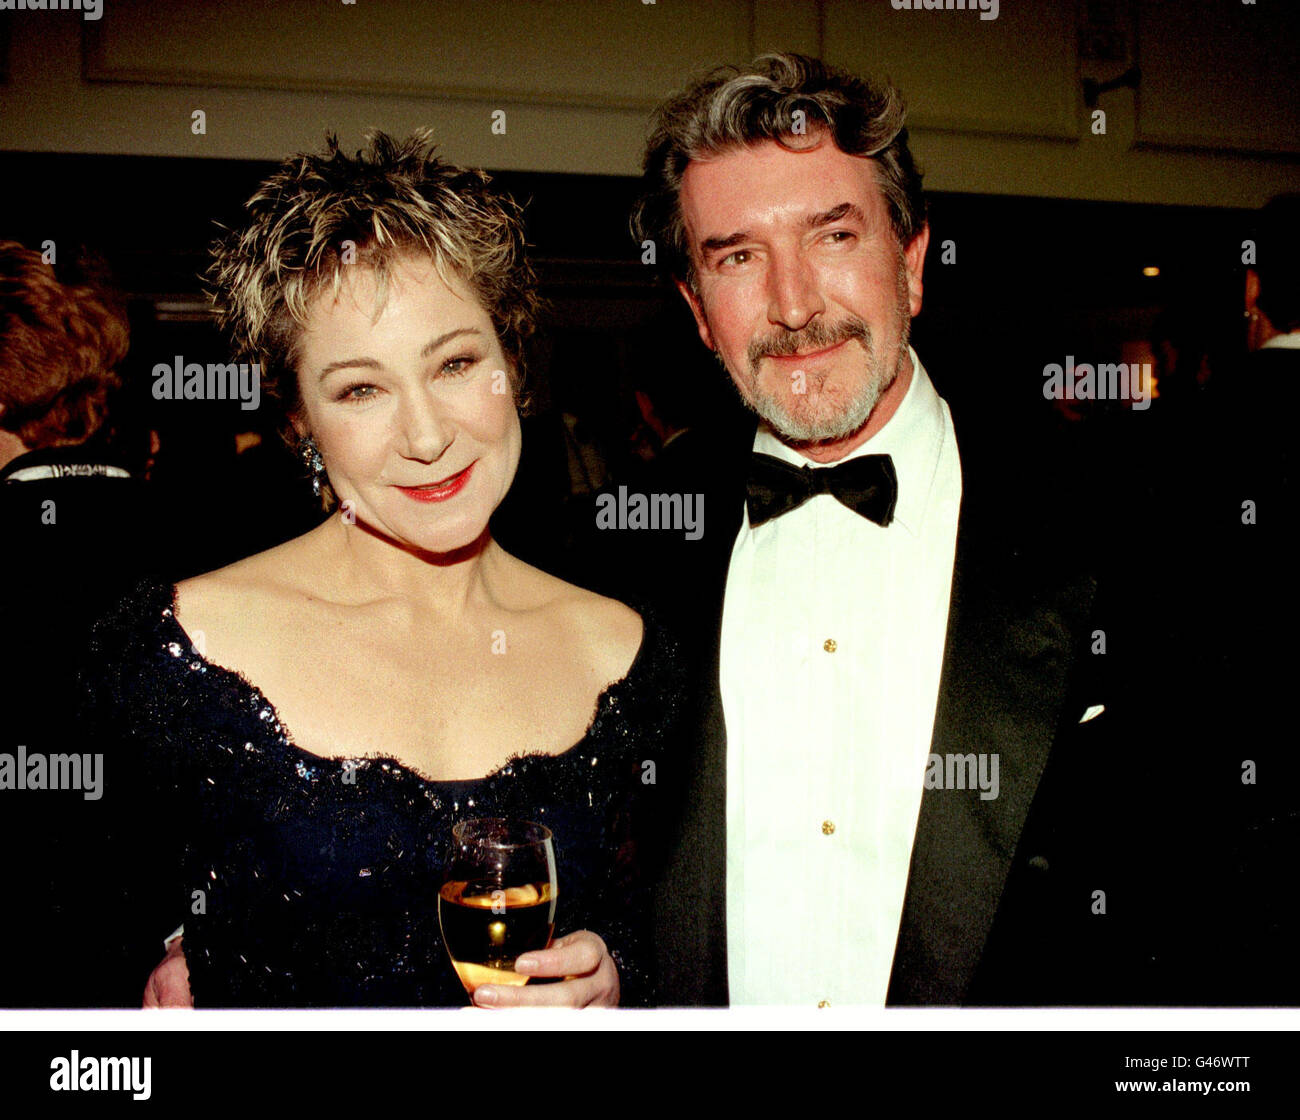 PA NEWS ZOE WANANMAKER AND GAWN GRAINGER AT THE EVENING STANDARD AWARDS. Stock Photo